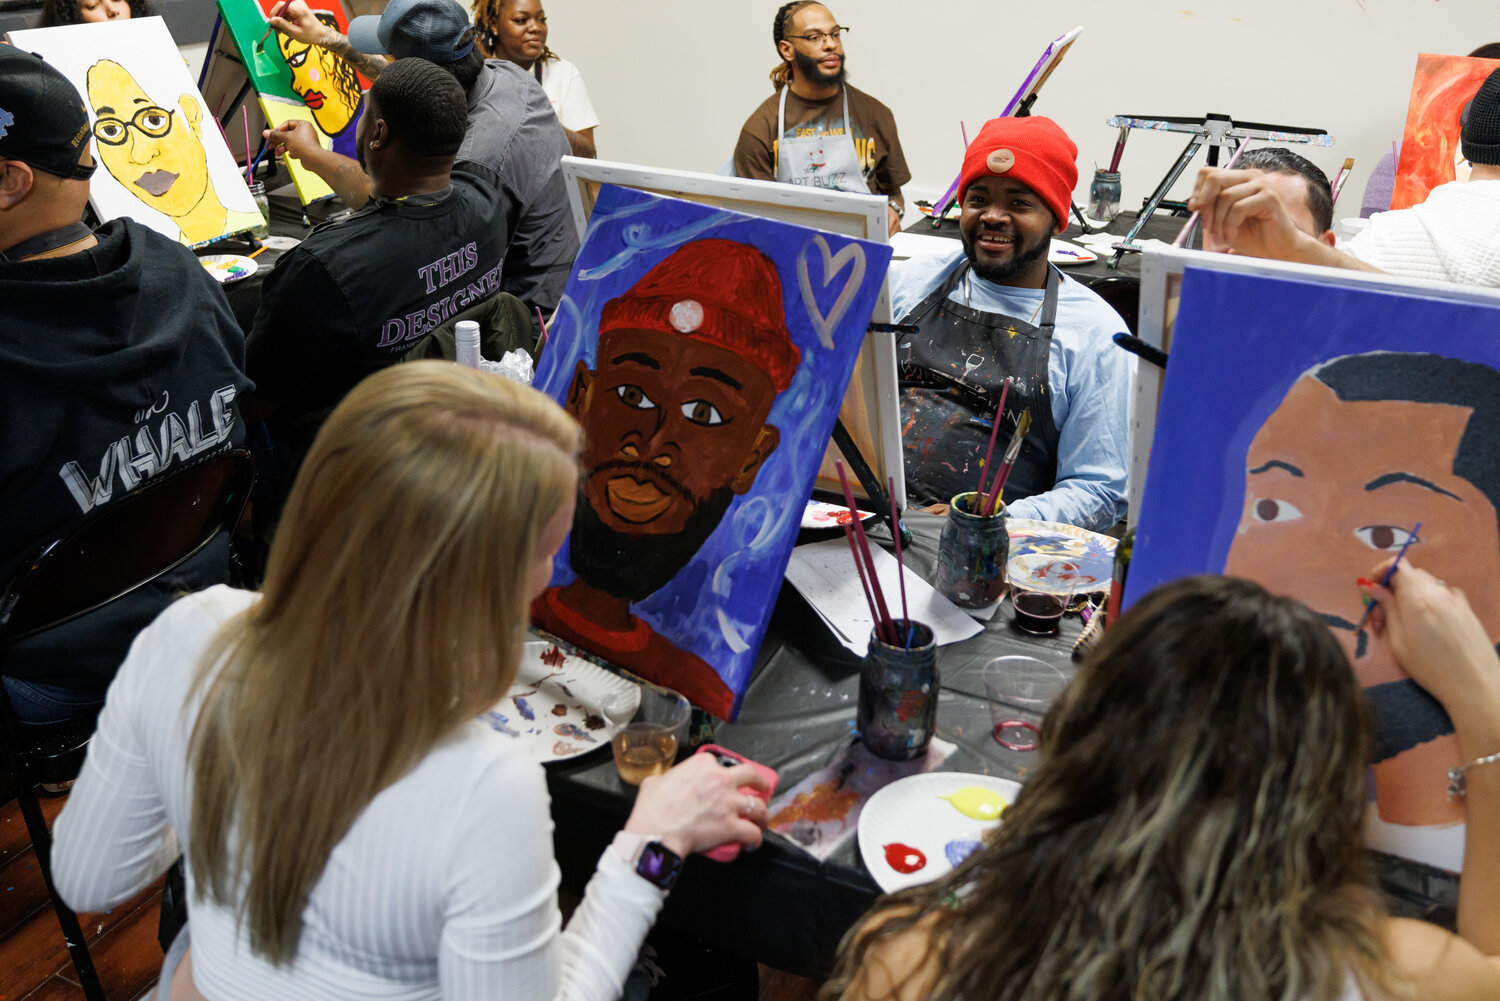 Stephanie Huckabee and Brandon Kirk have been together for years and decided to mix things up by attending Wine & Design Fayetteville's Date Night to paint portraits of each other.